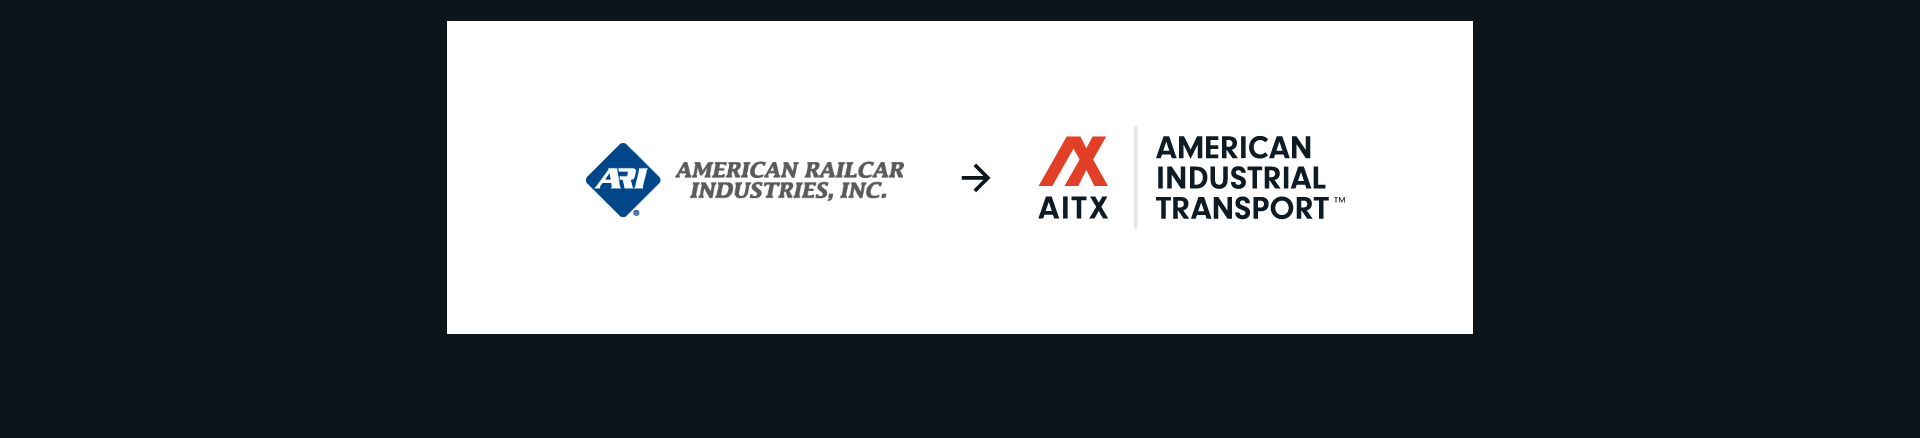 American Industrial Transport's old logo and new logo design